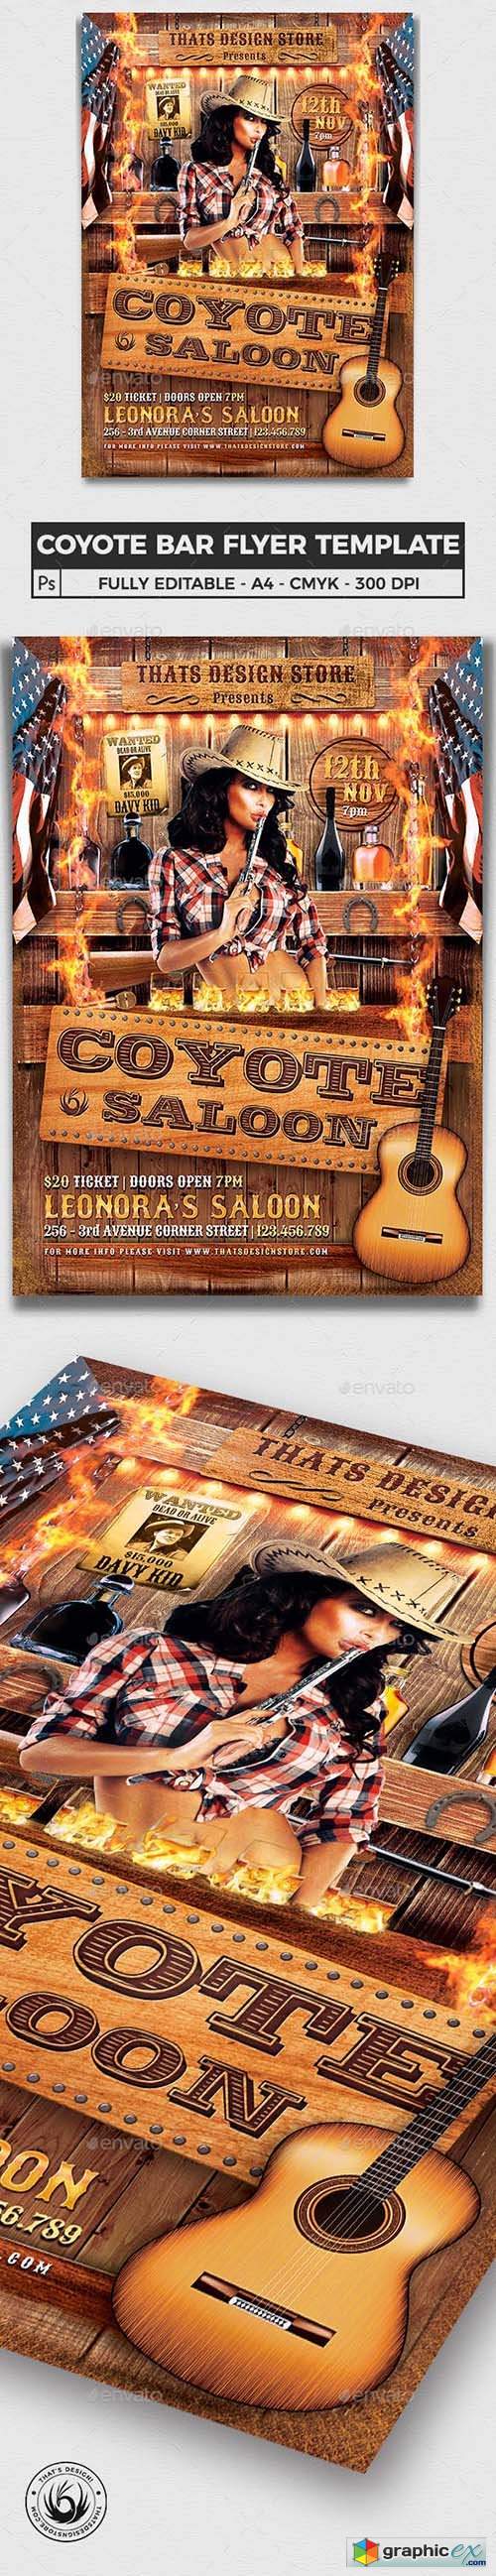 Coyote Bar Flyer Template